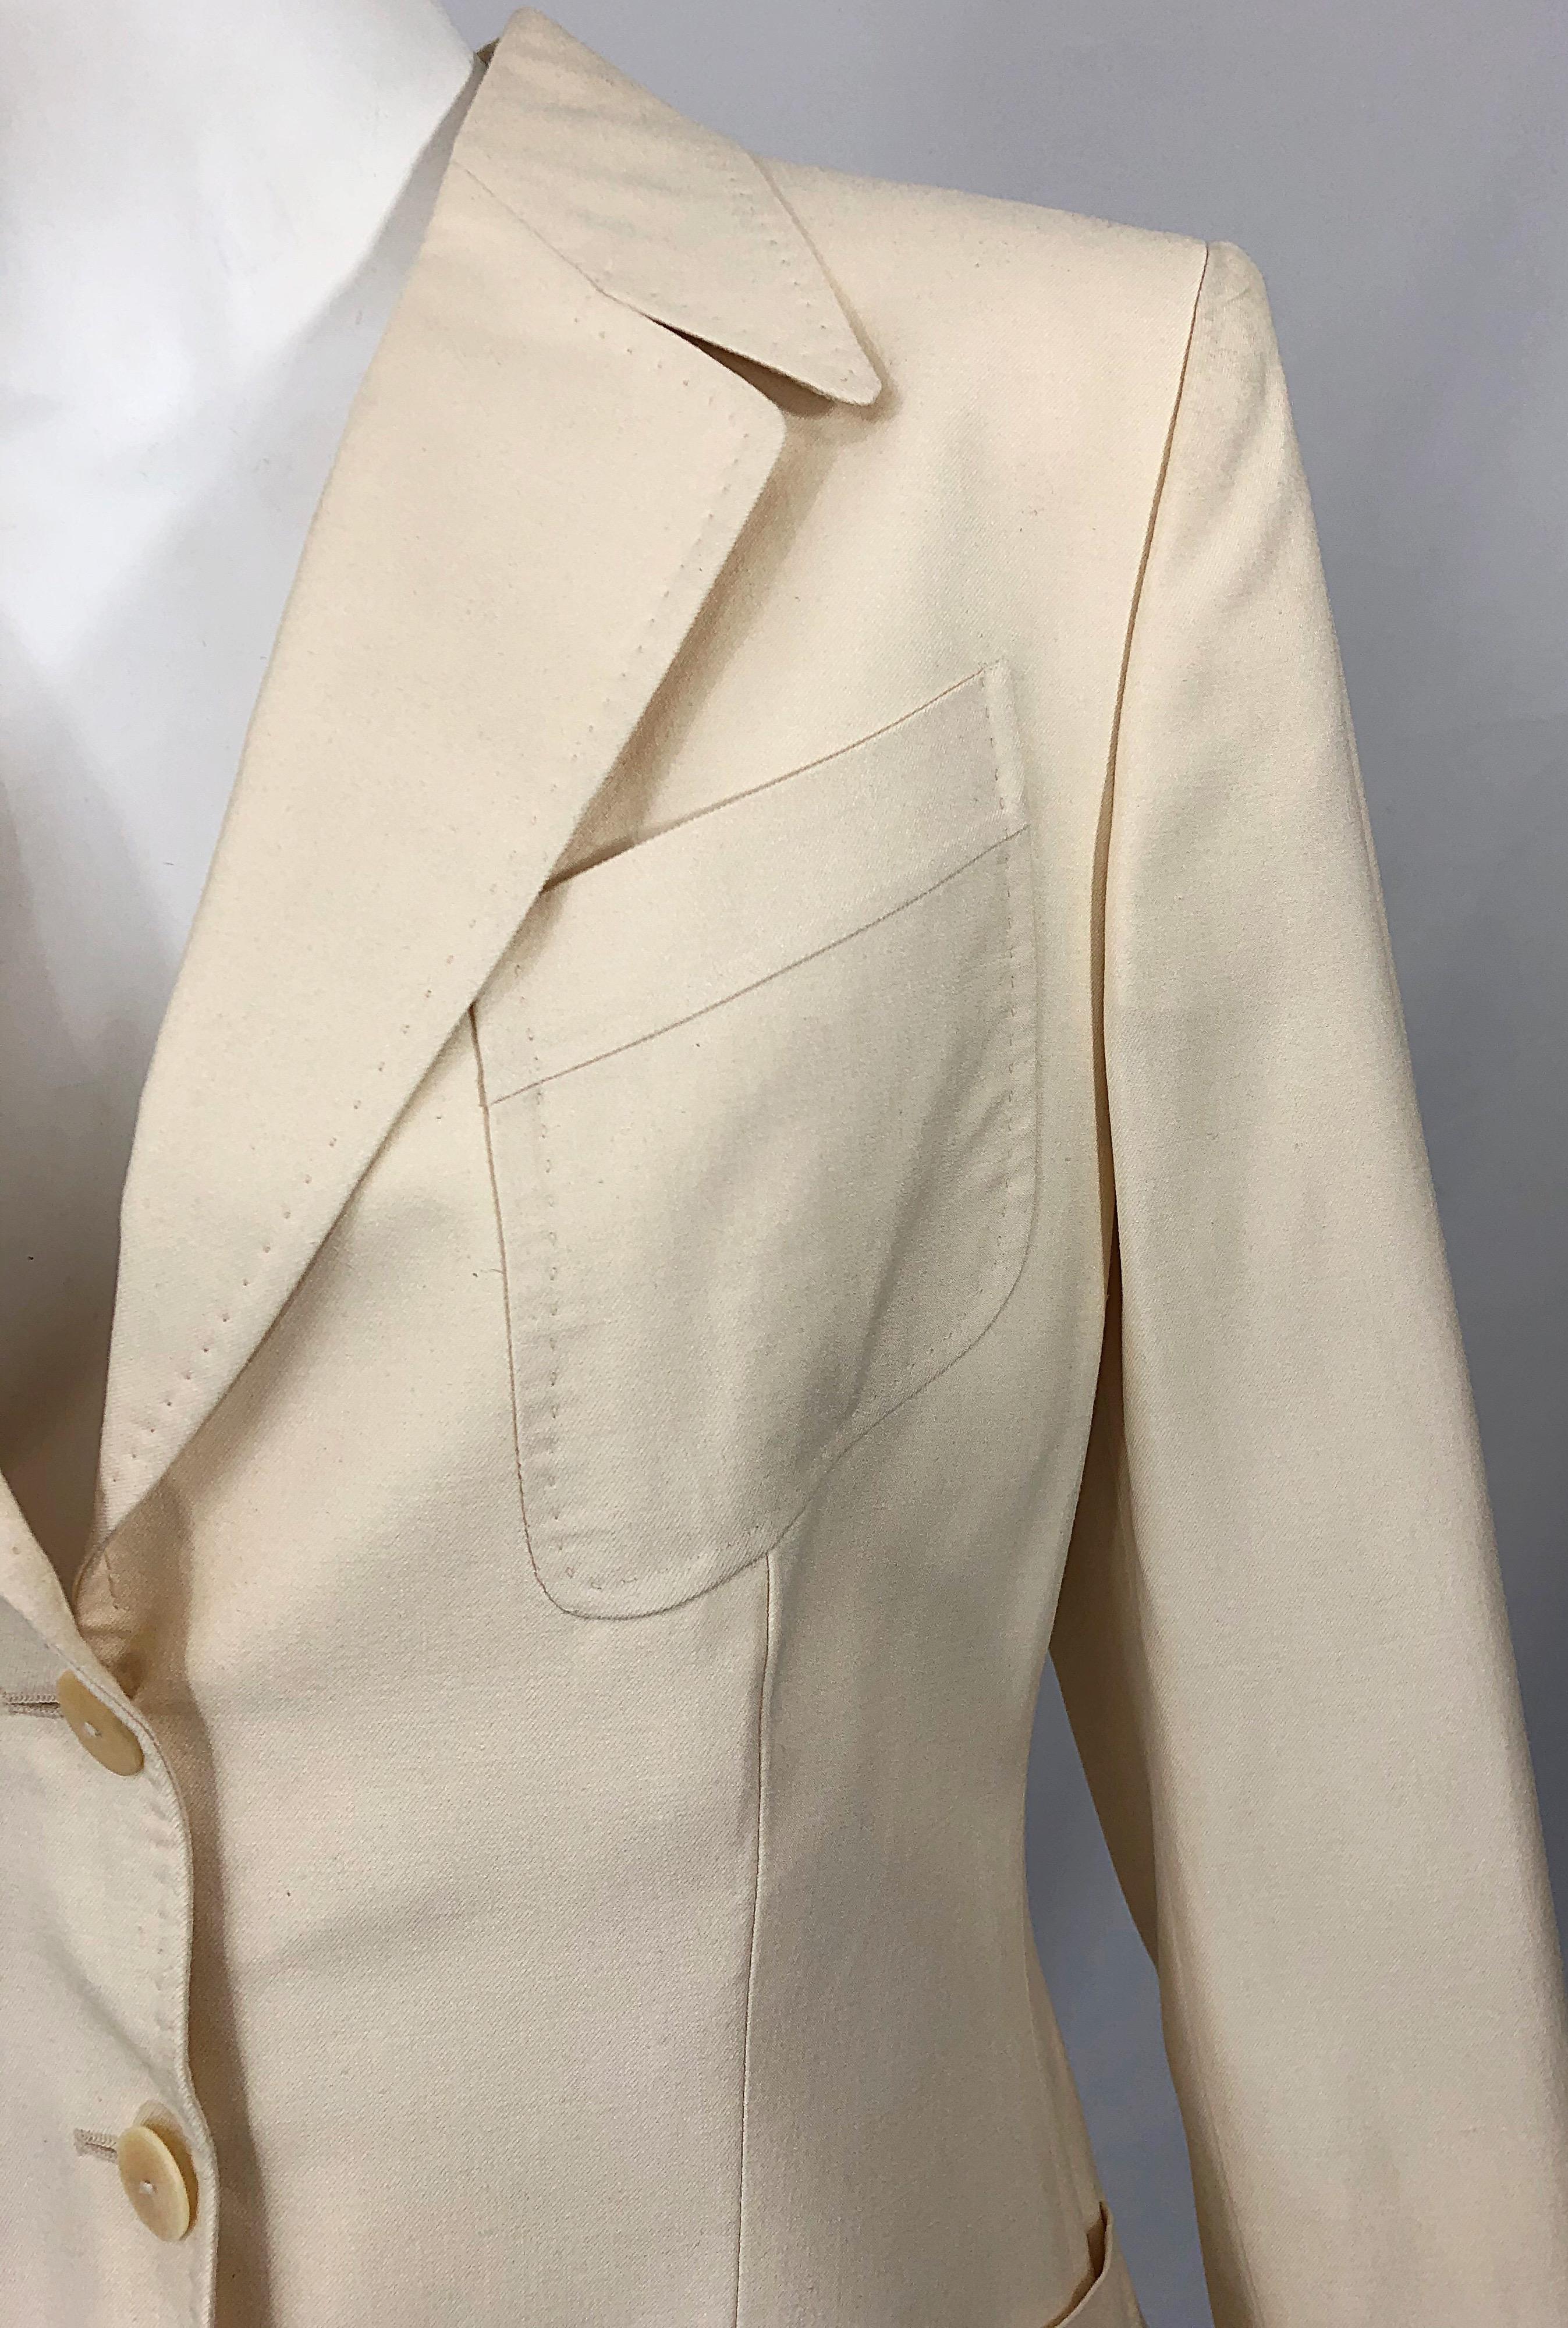 Beige Vintage Thierry Mugler Couture 1990s Size 40 / US 8 Ivory Silk 90s Blazer Jacket For Sale